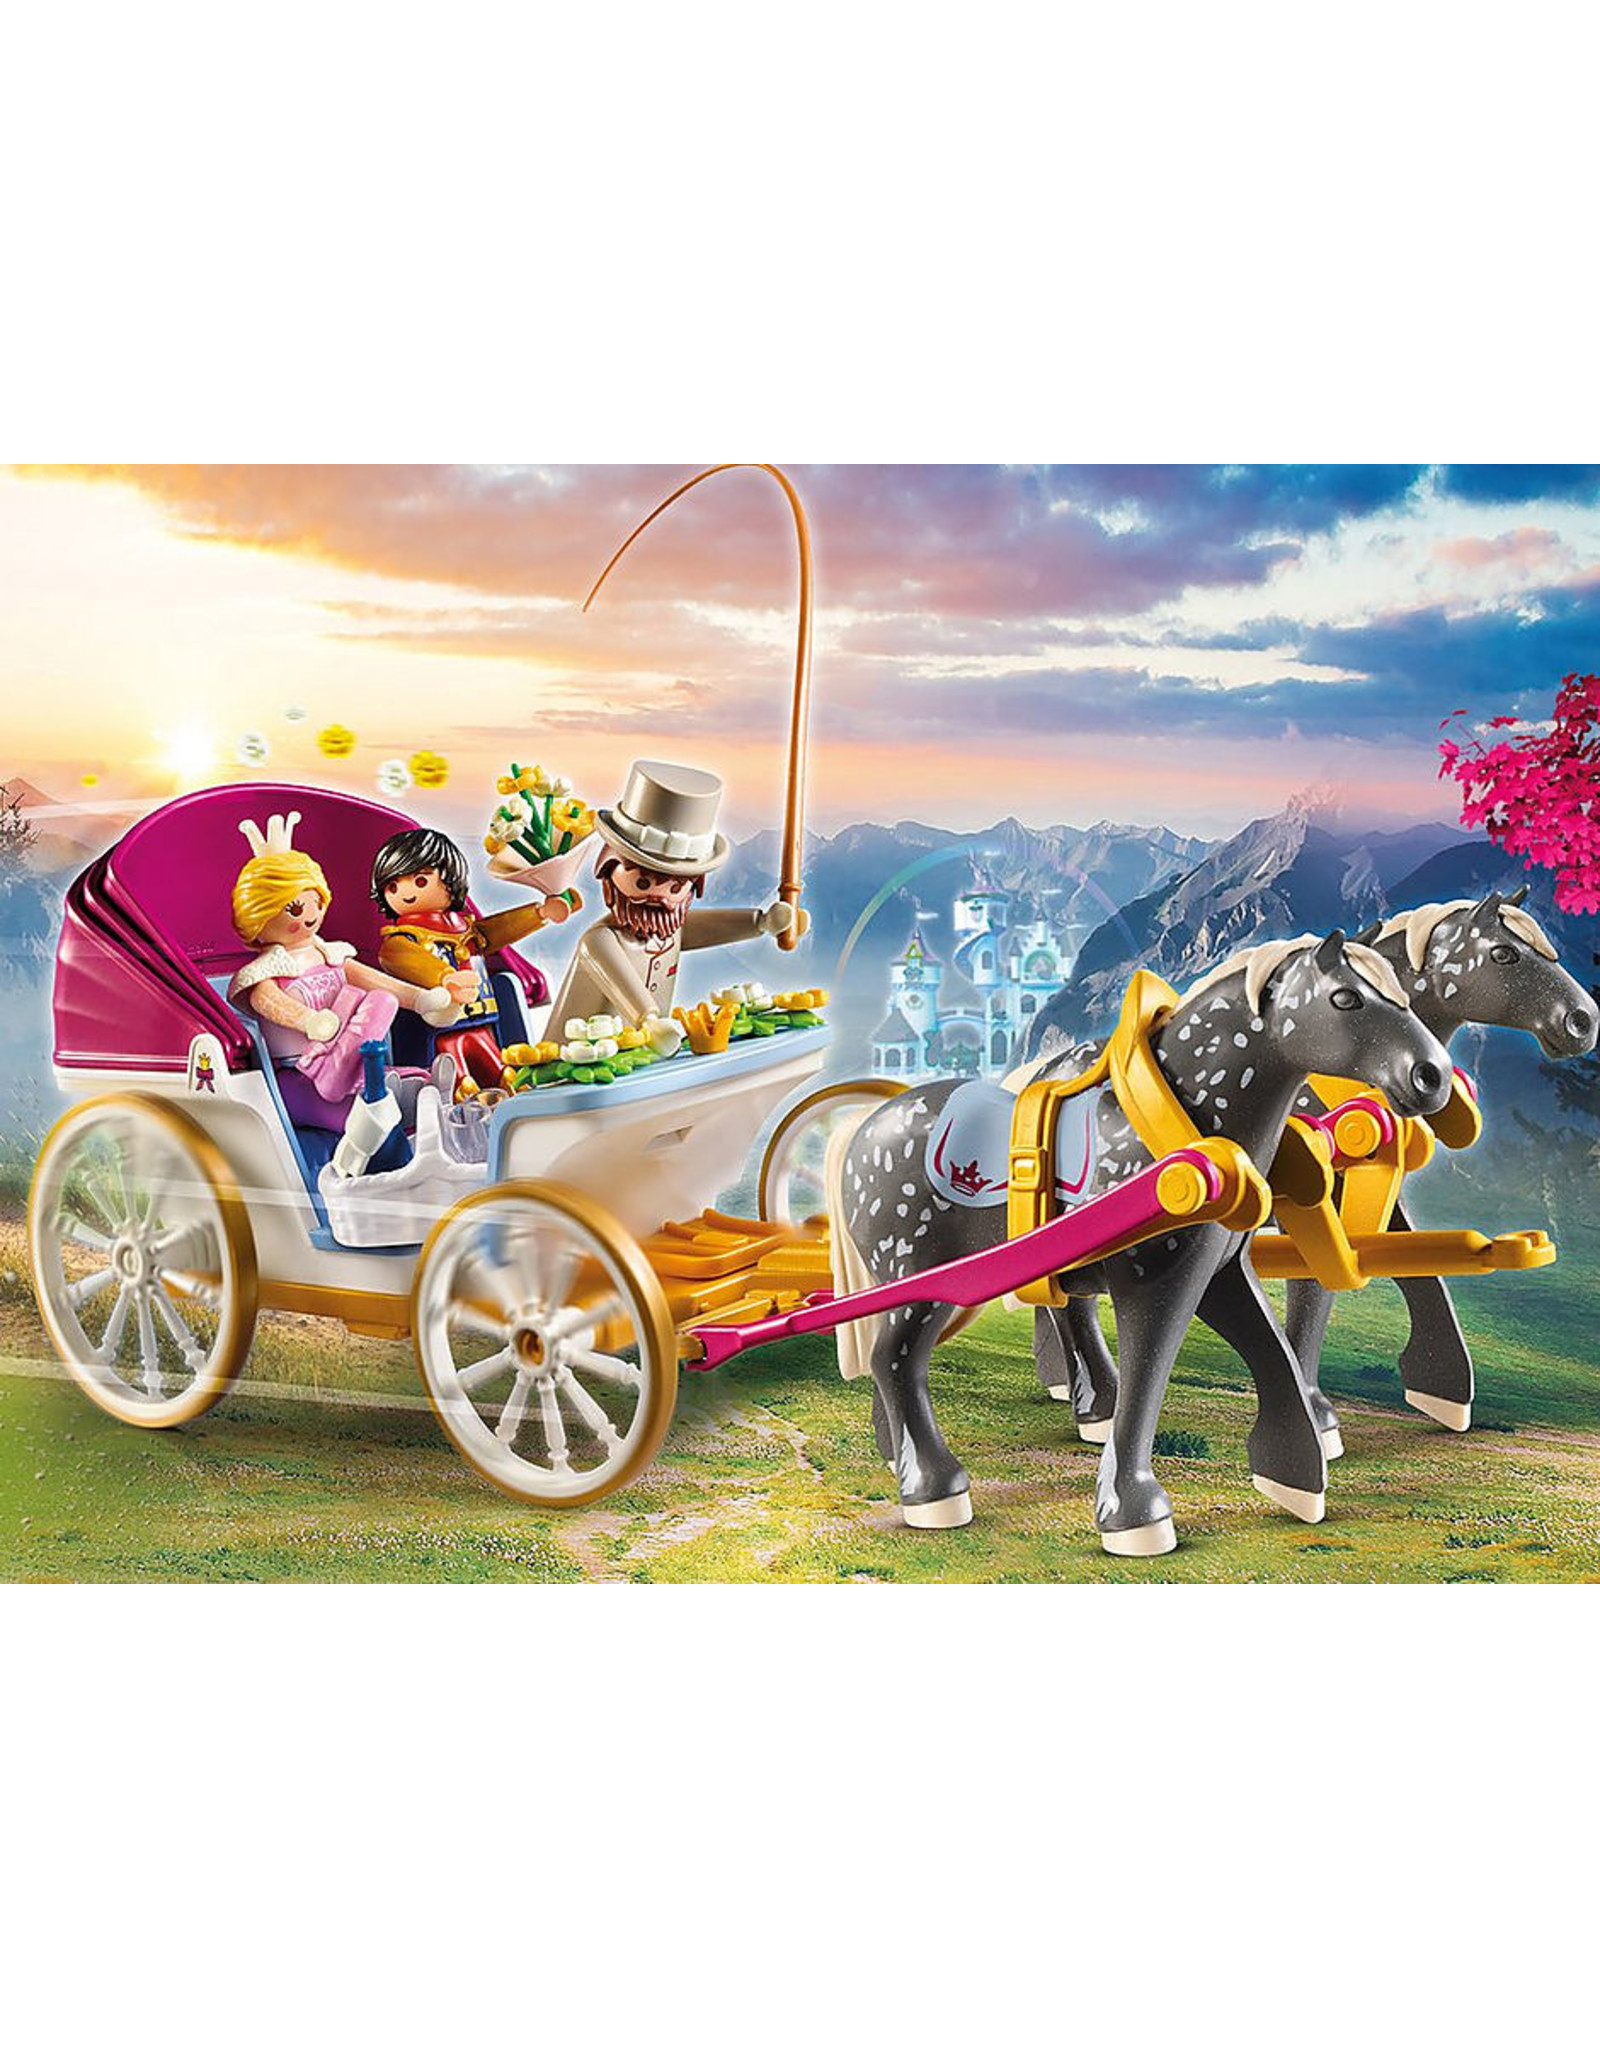 Playmobil Horse-Drawn Carriage